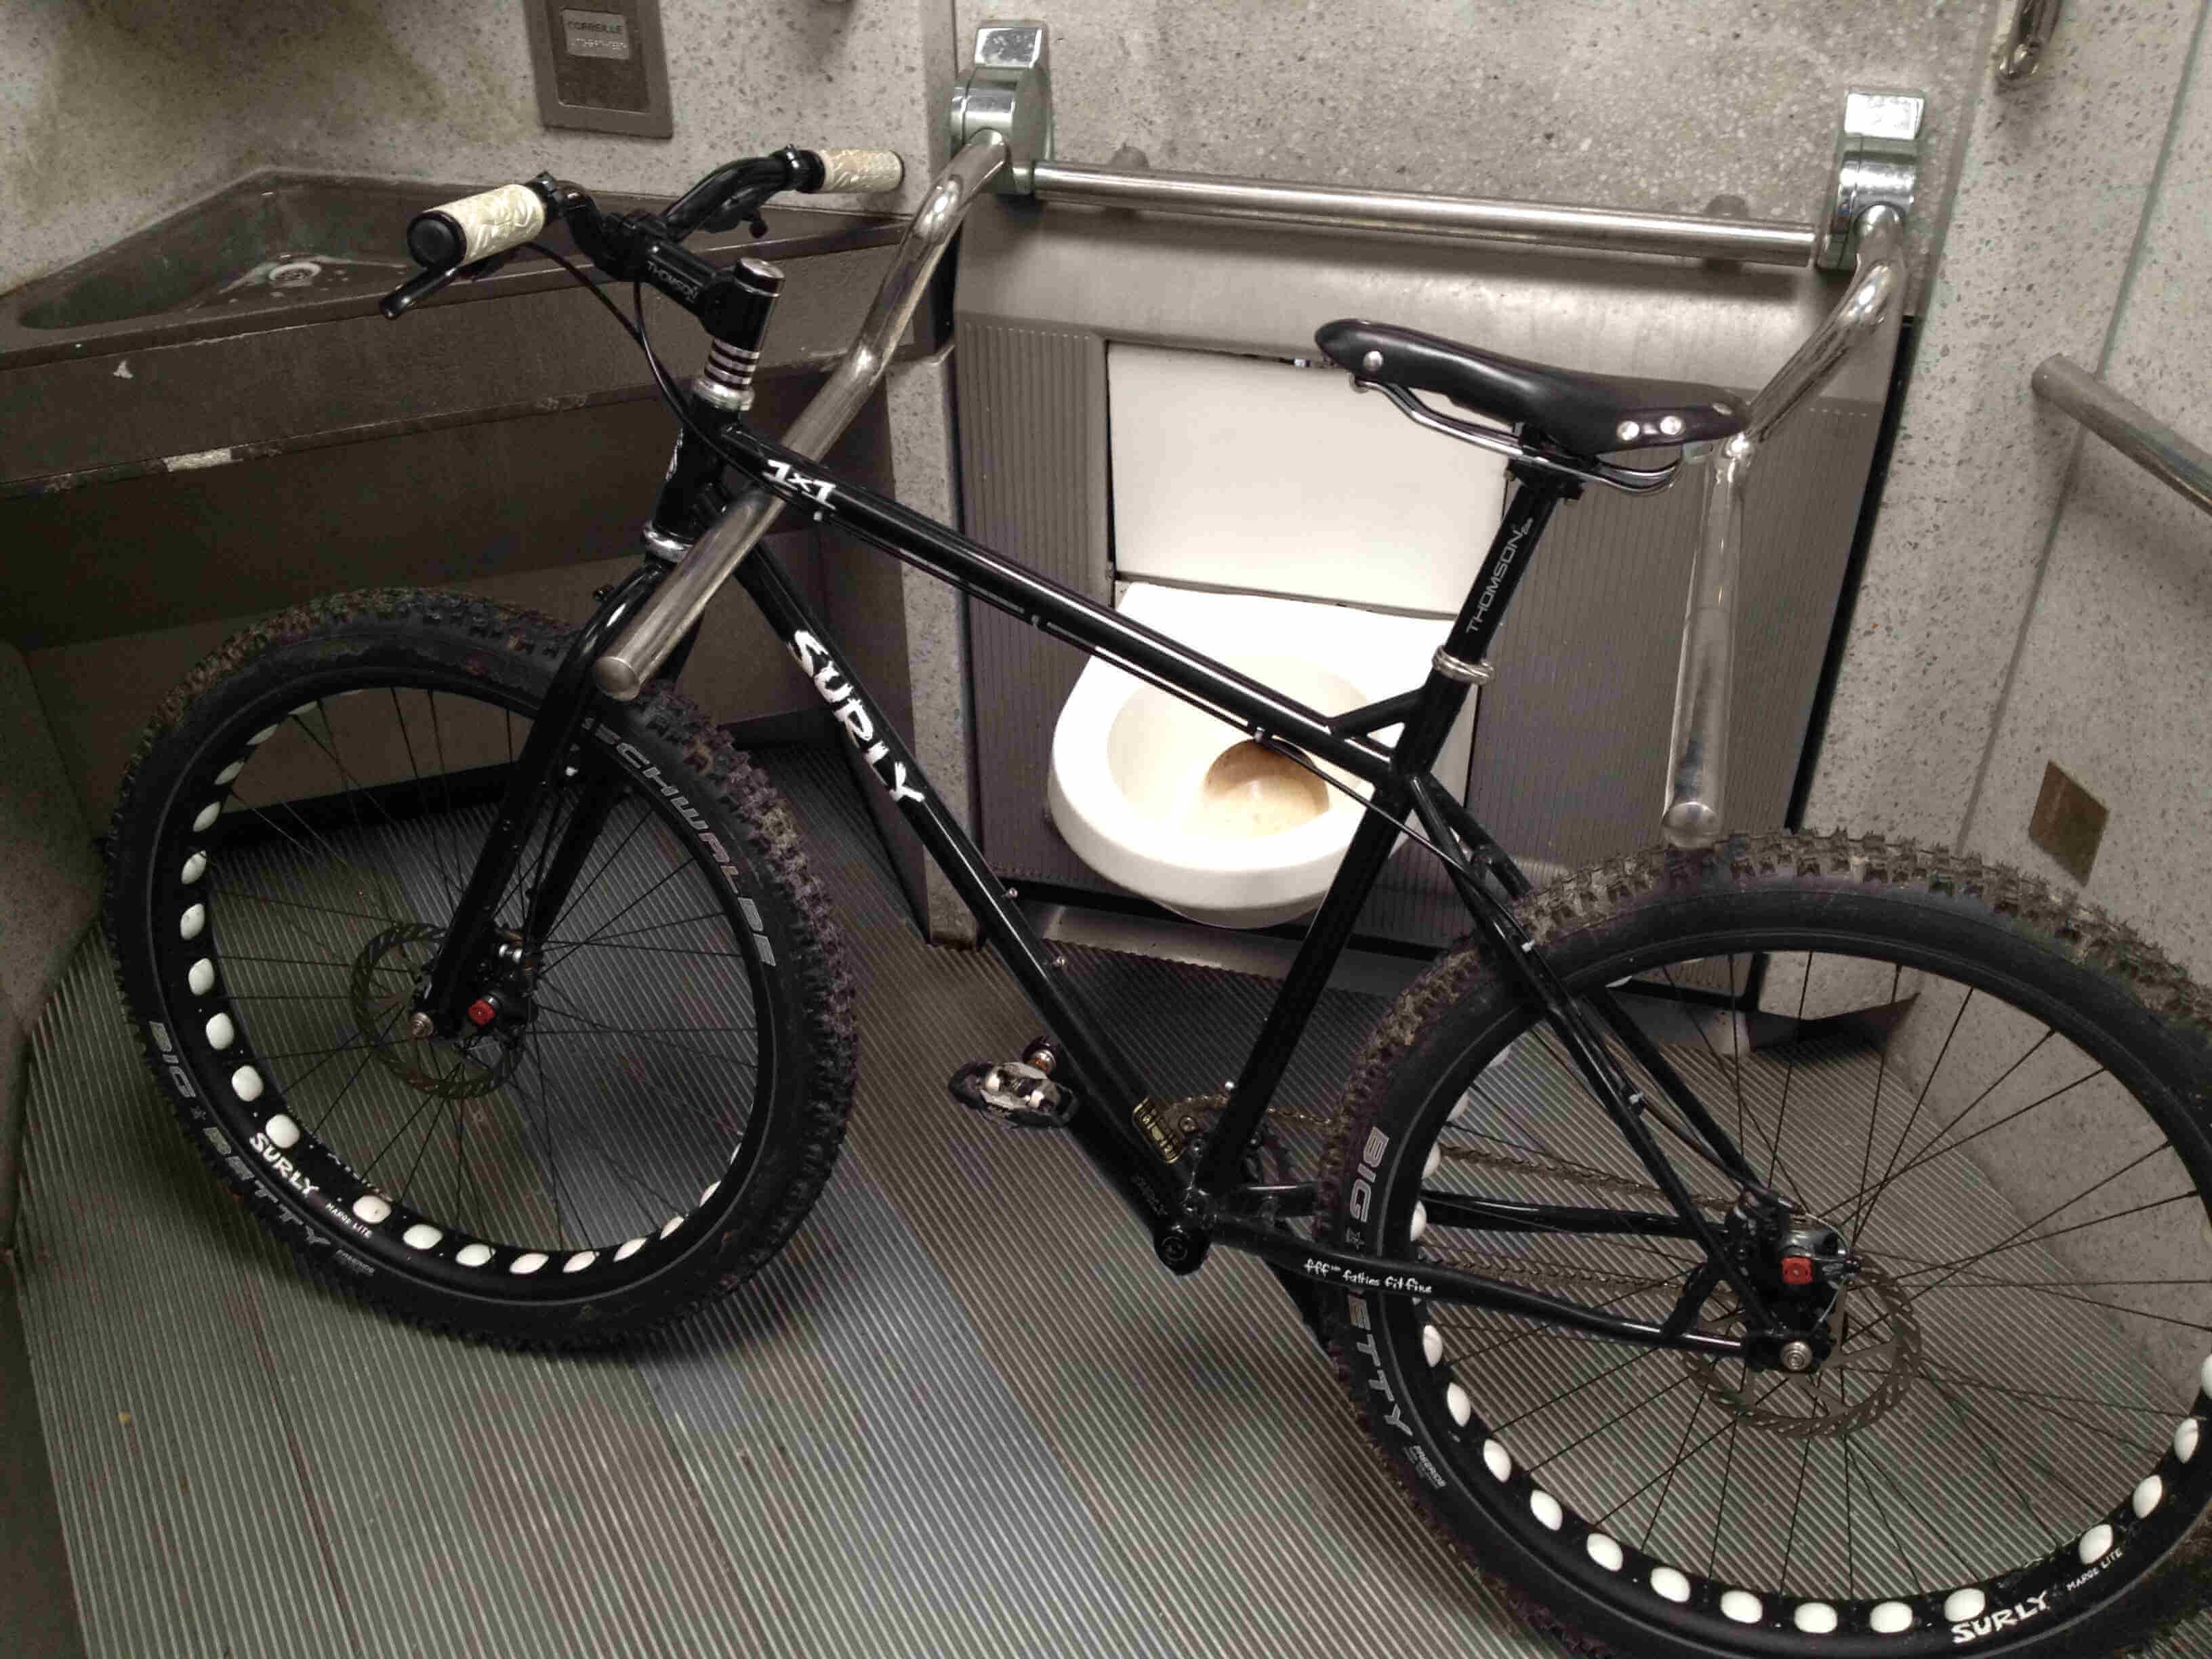 Left side view of a black Surly 1x1 bike, leaning on a handrail, inside of a public restroom